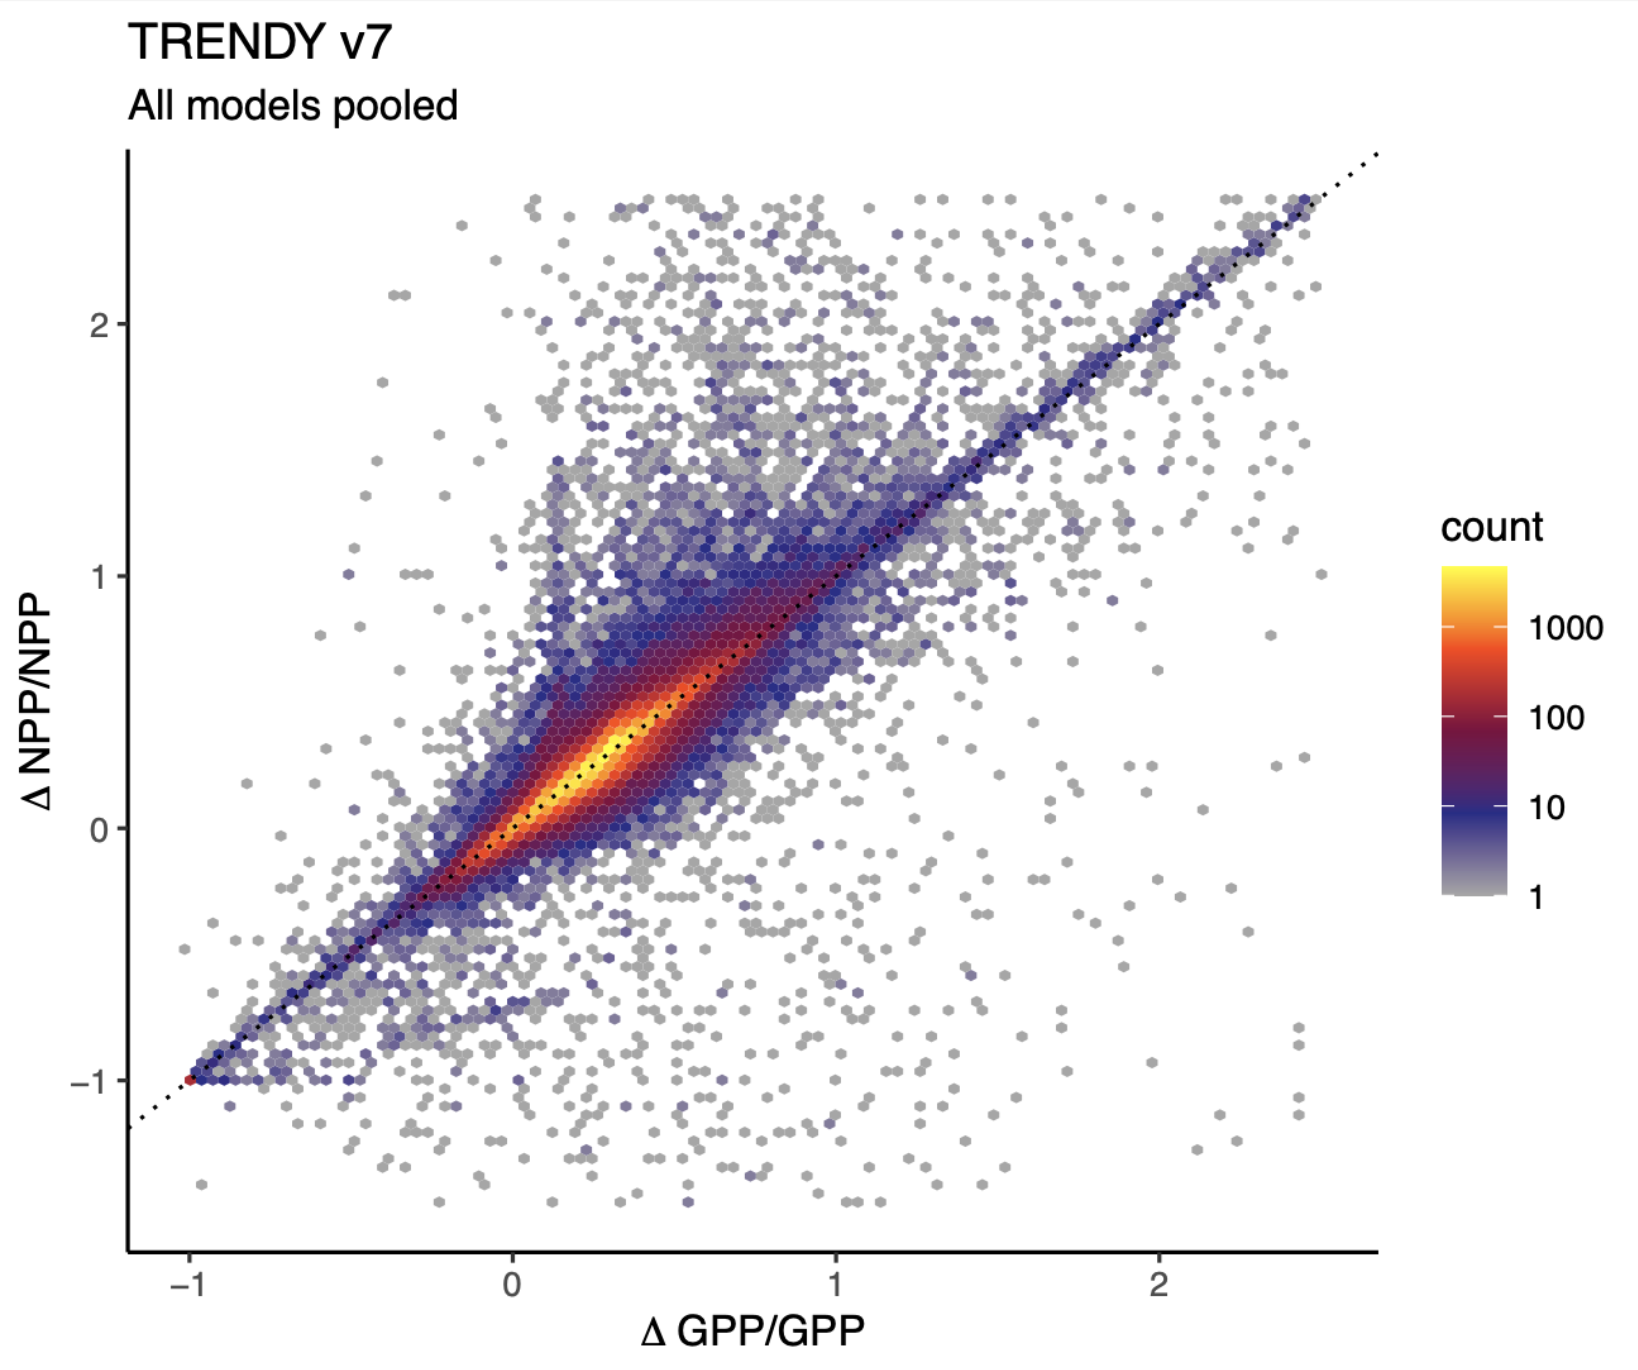 Relatinship of the relantive enhancement in NPP versus the relative enhancement in GPP, derived from CO2-only simulations of a set of Dynamic Global Vegetation Models. This shows a point density of data points representing individual gridcells of all models pooled. Their clustering around the 1:1 line indicates linearity in the relationship between GPP and NPP and implies a constant ratio of NPP:GPP.